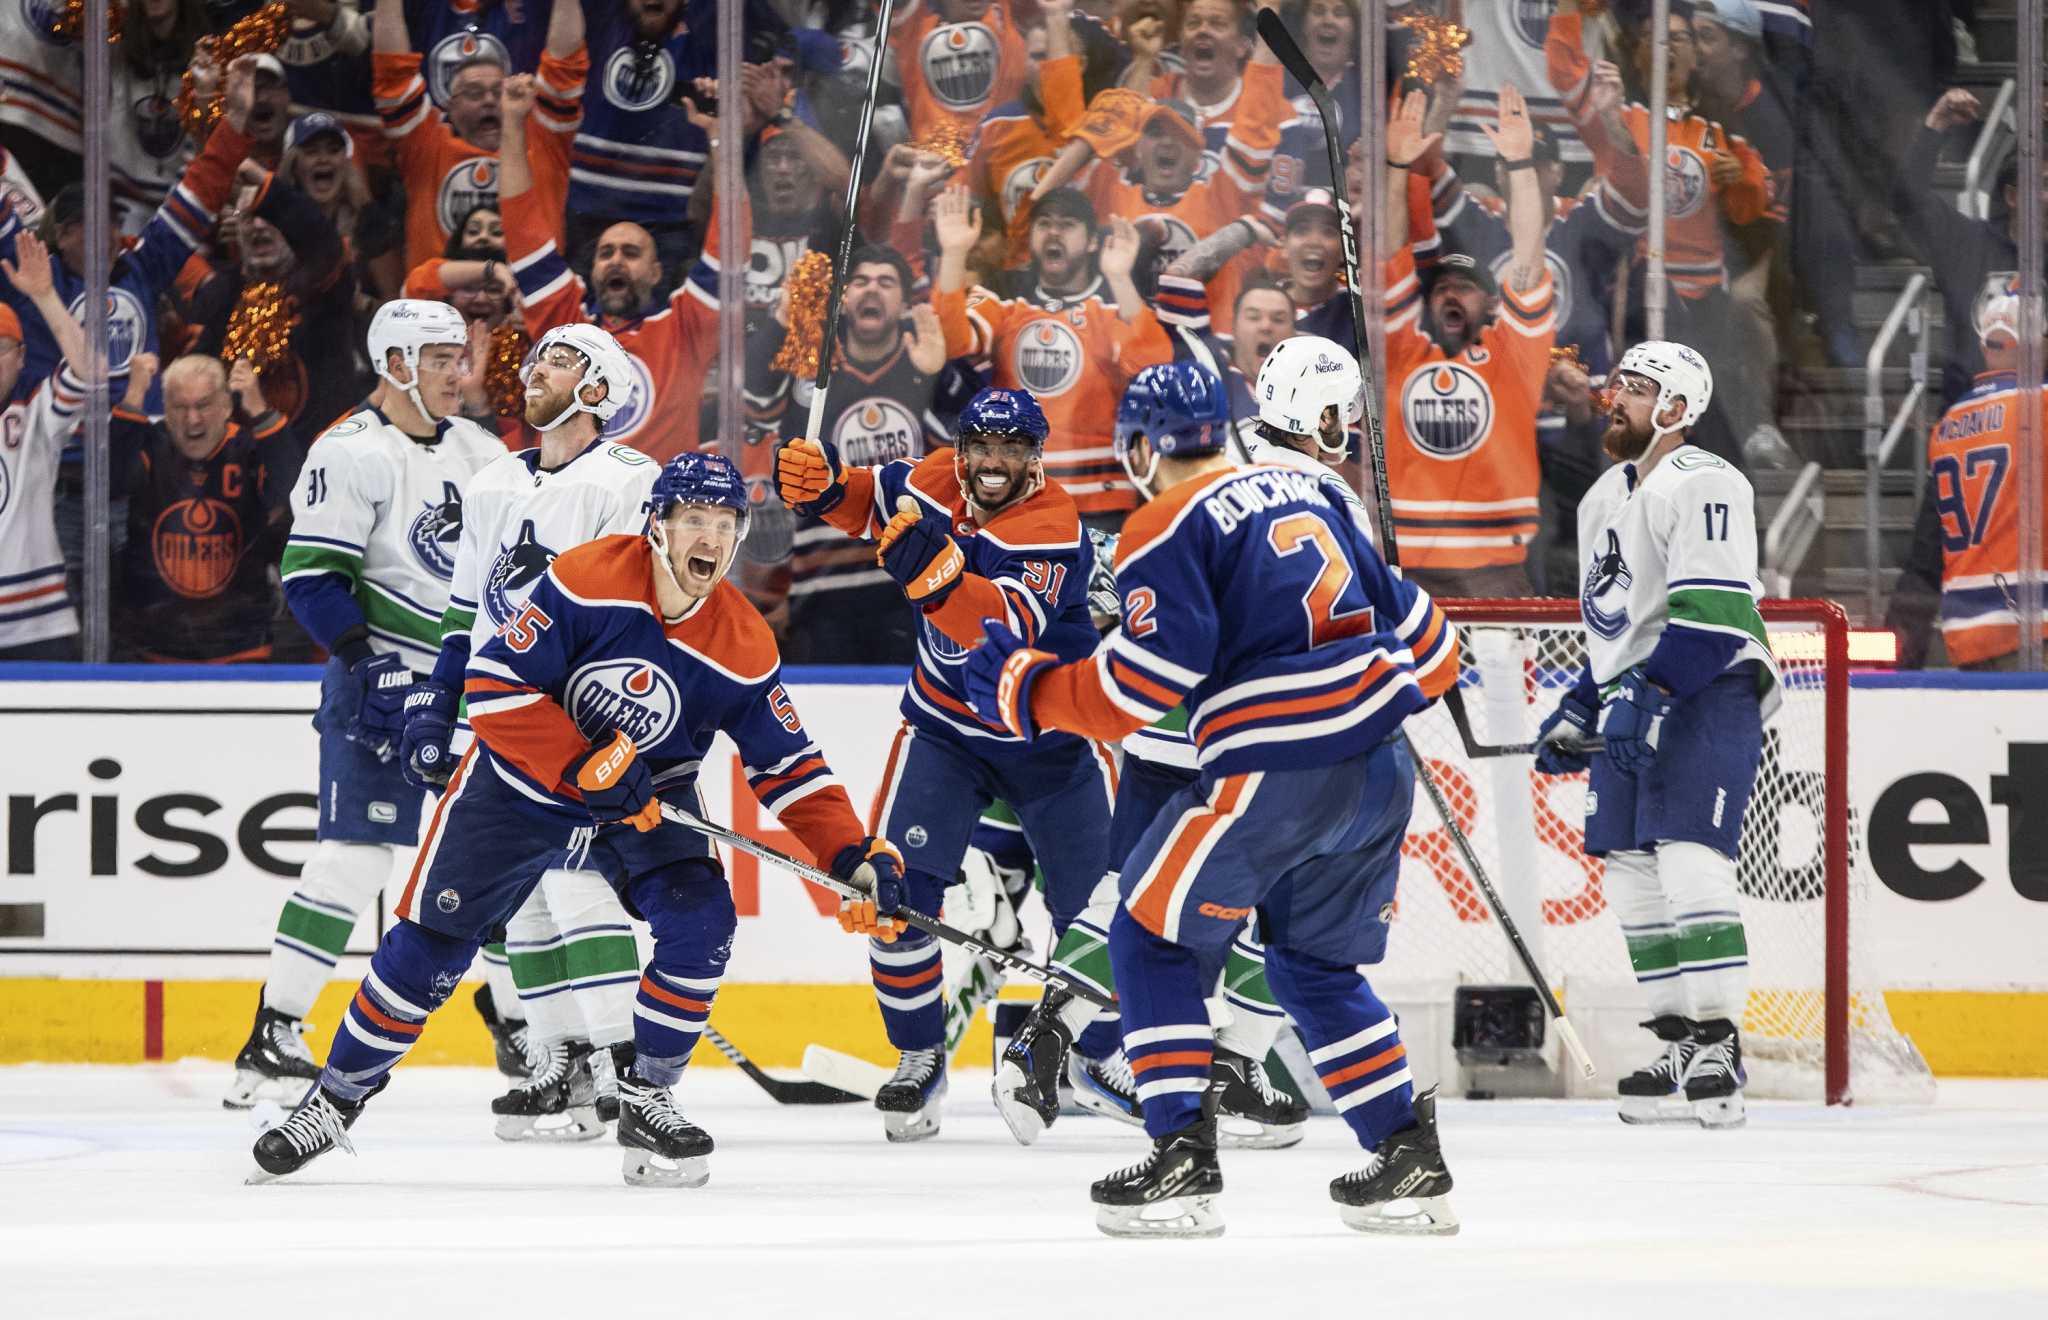 Bouchard scores late winner, Oilers edge Canucks 3-2 to tie playoff series at 2 games apiece